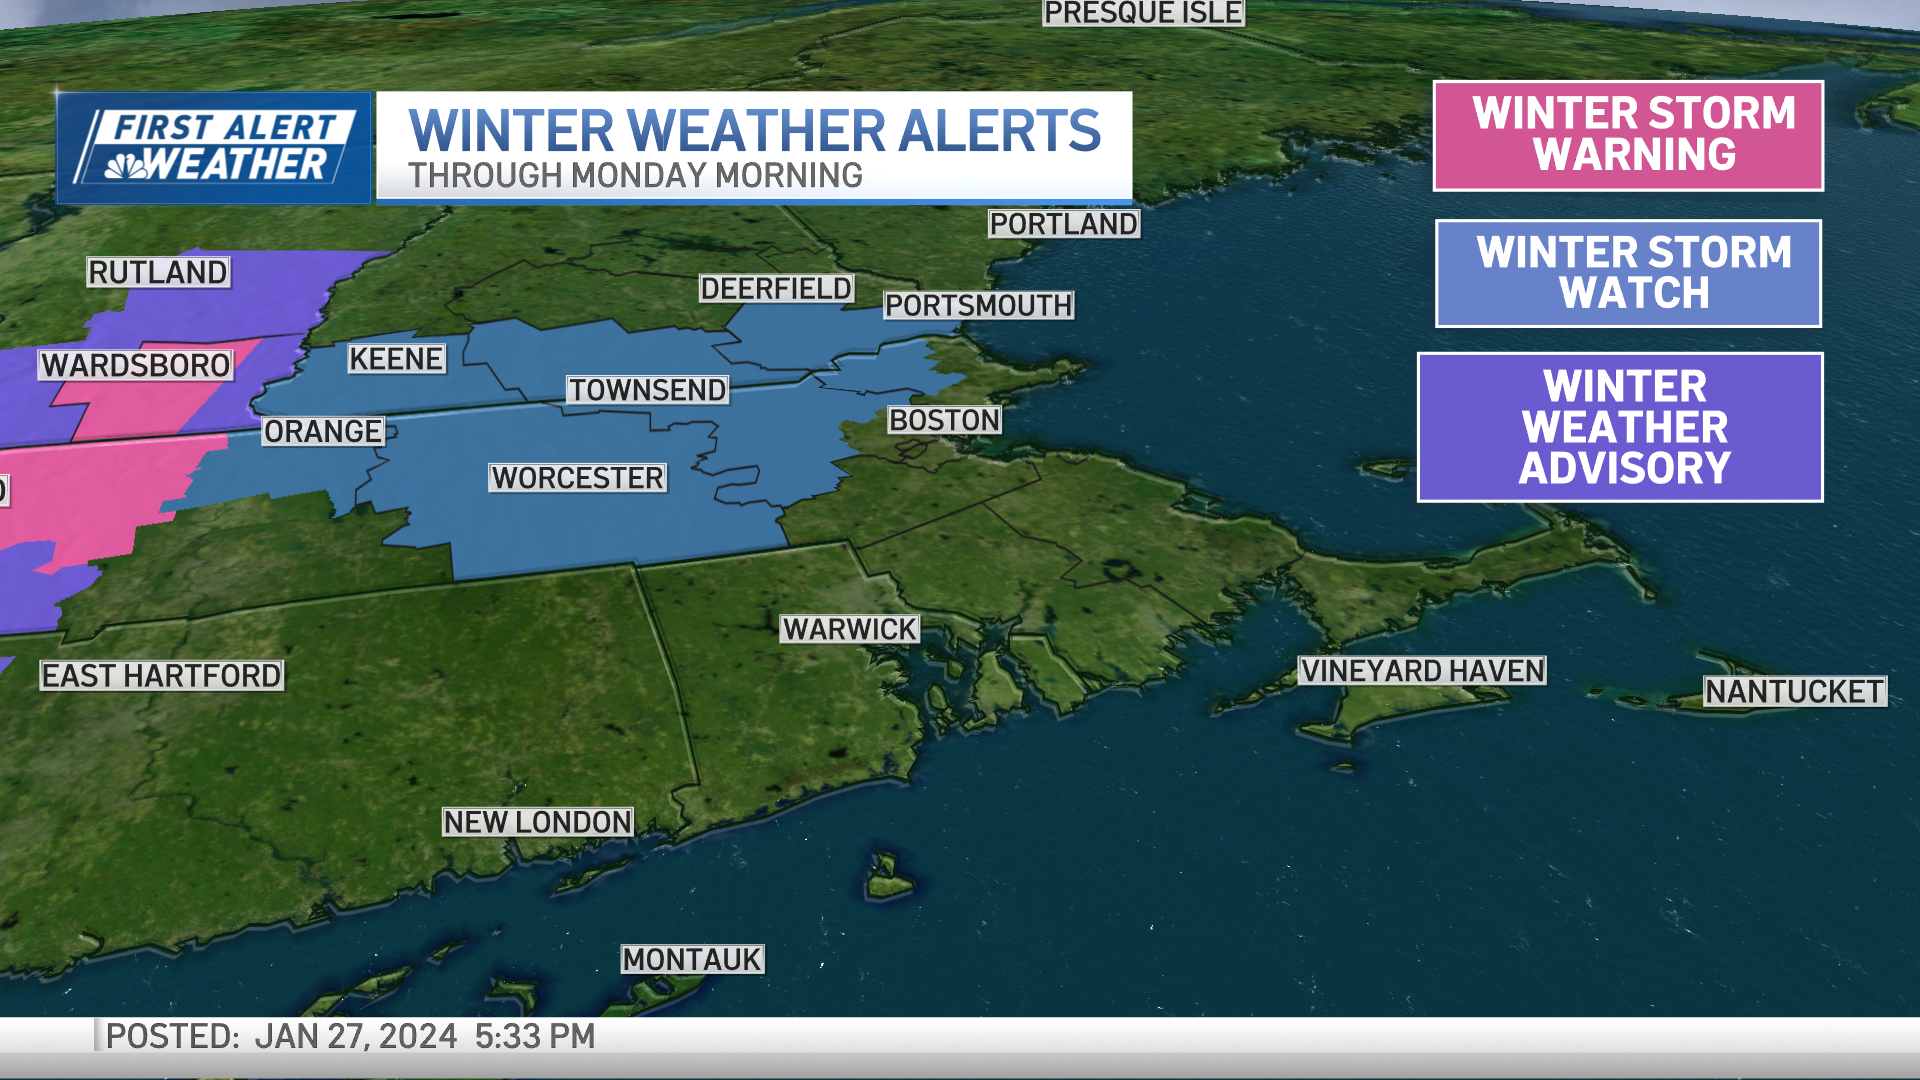 A winter storm watch is in place for parts of central and northeastern Massachusetts, as well as southern New Hampshire, through Monday, Jan. 29, 2024.